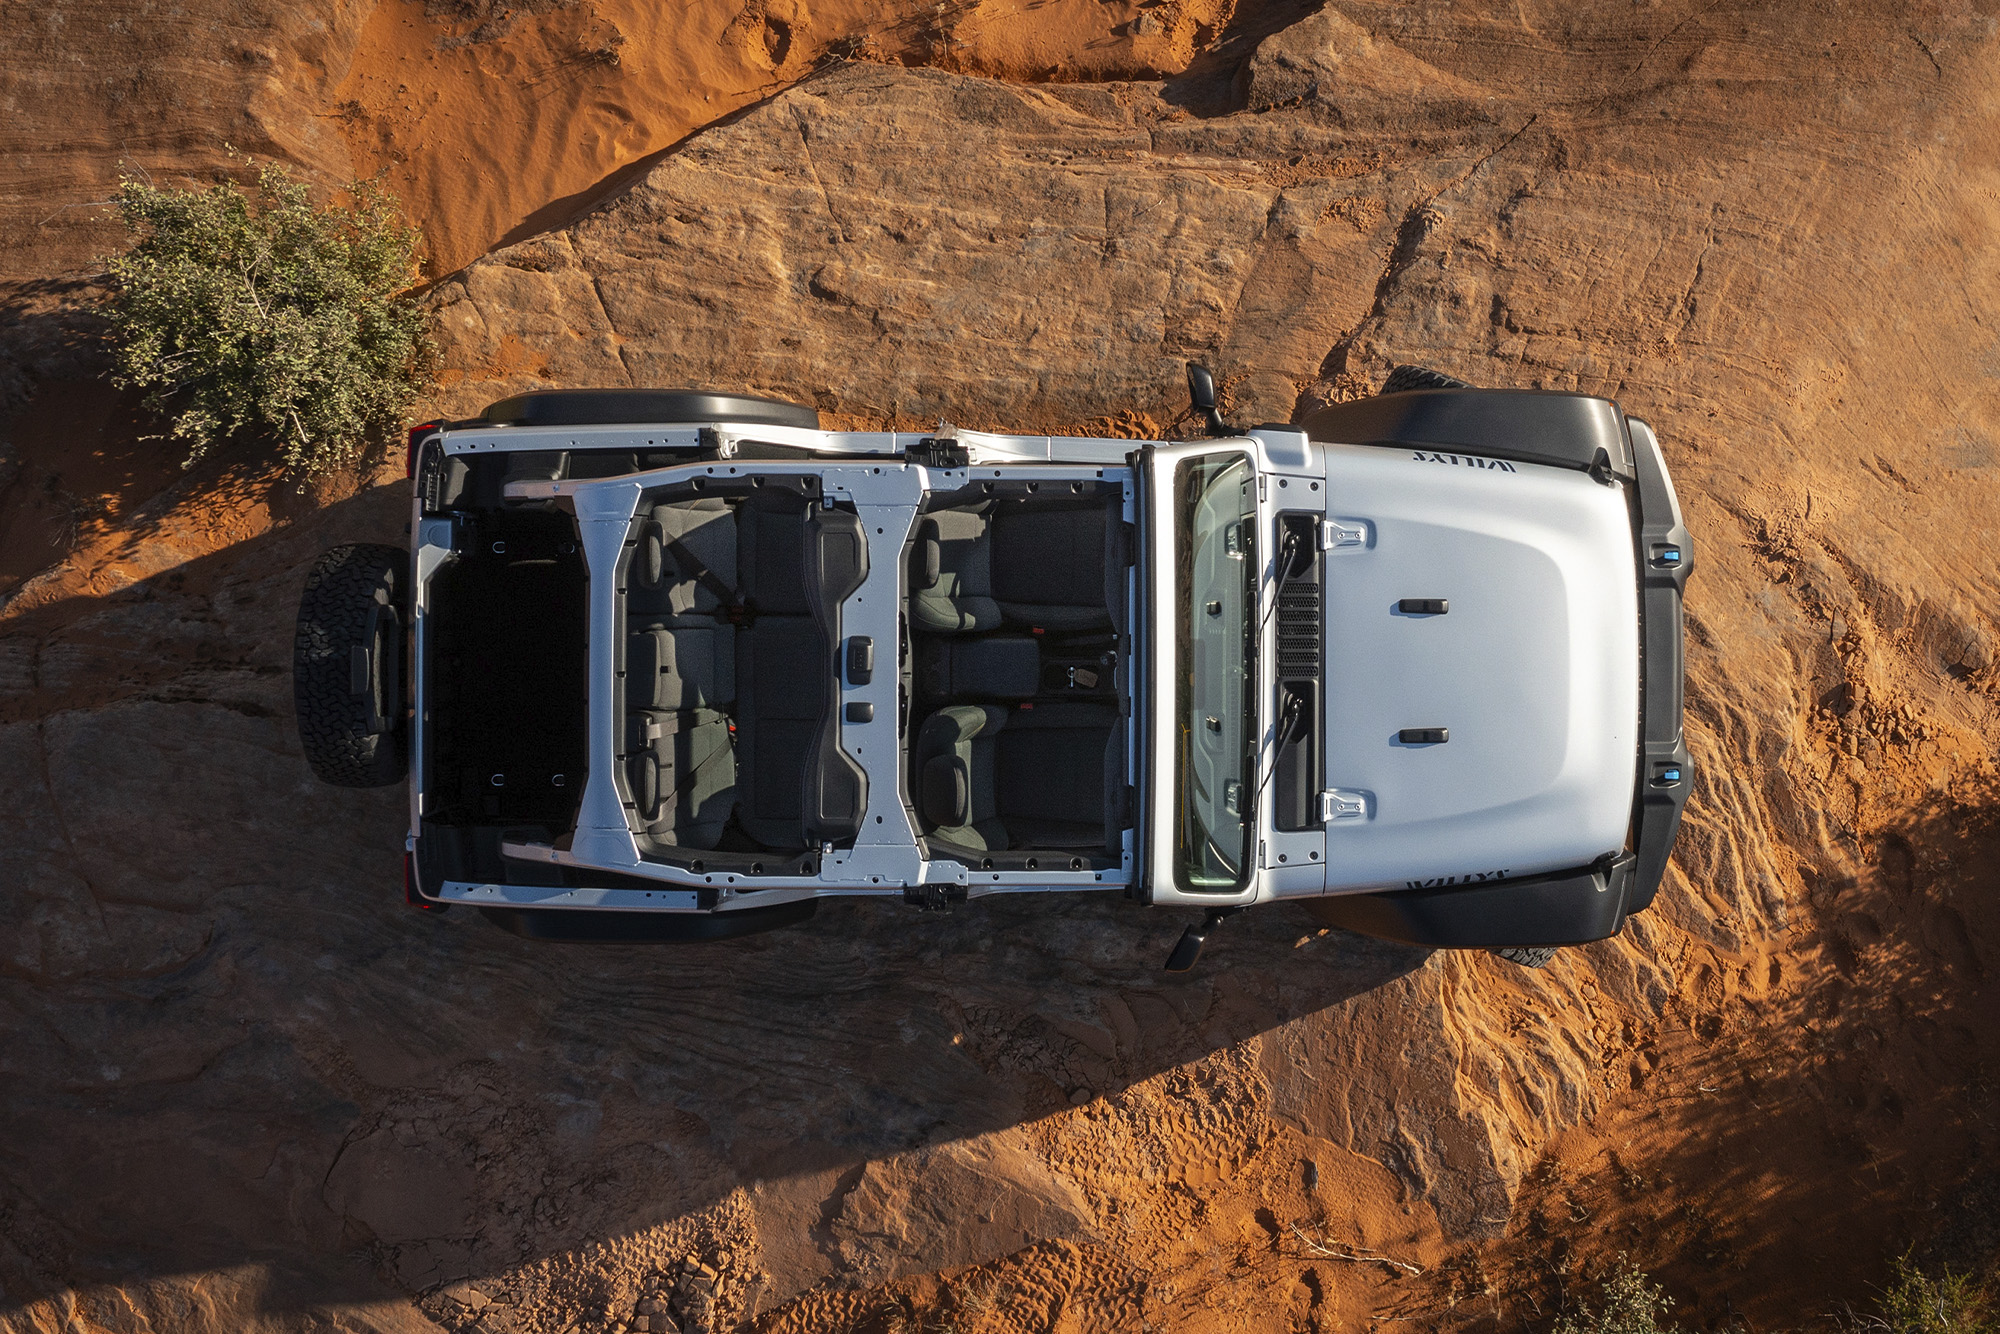 Bird's eye view of the top of a silver Jeep Wrangler parked in desert